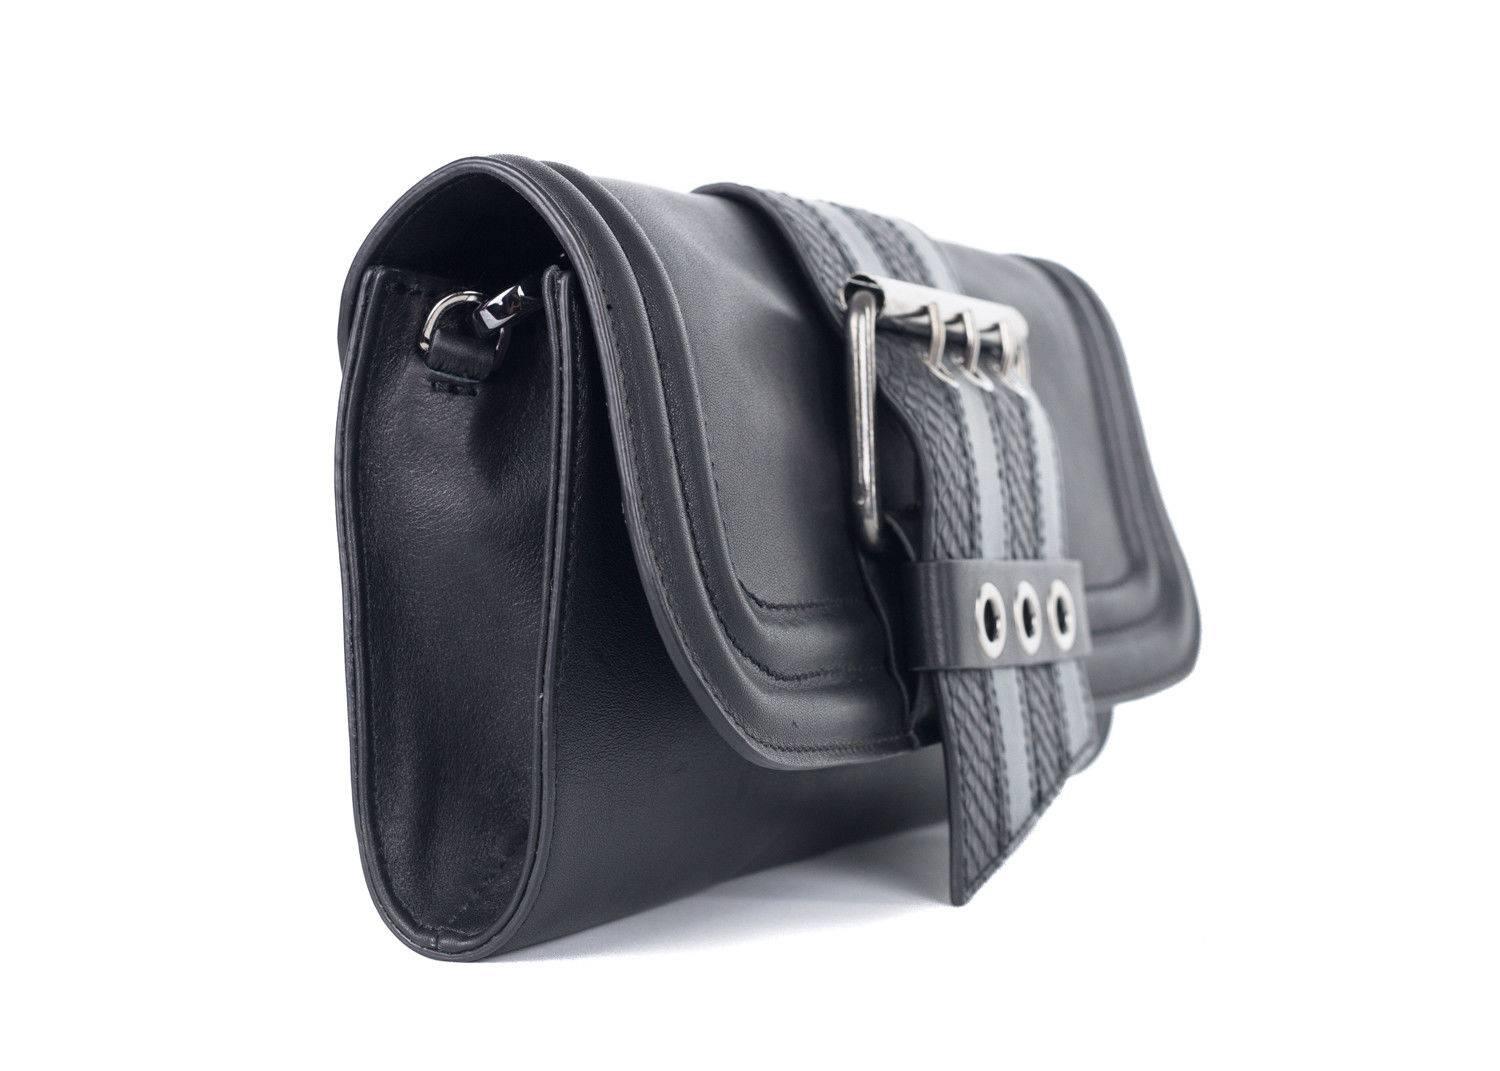 Just Cavalli black leather clutch shoulder bag. This bag features a metallic strap with accents of snake embossed print and matching silver tone hardware. Give your style a slight edge with this black clutch shoulder bag or use it as an everyday bag